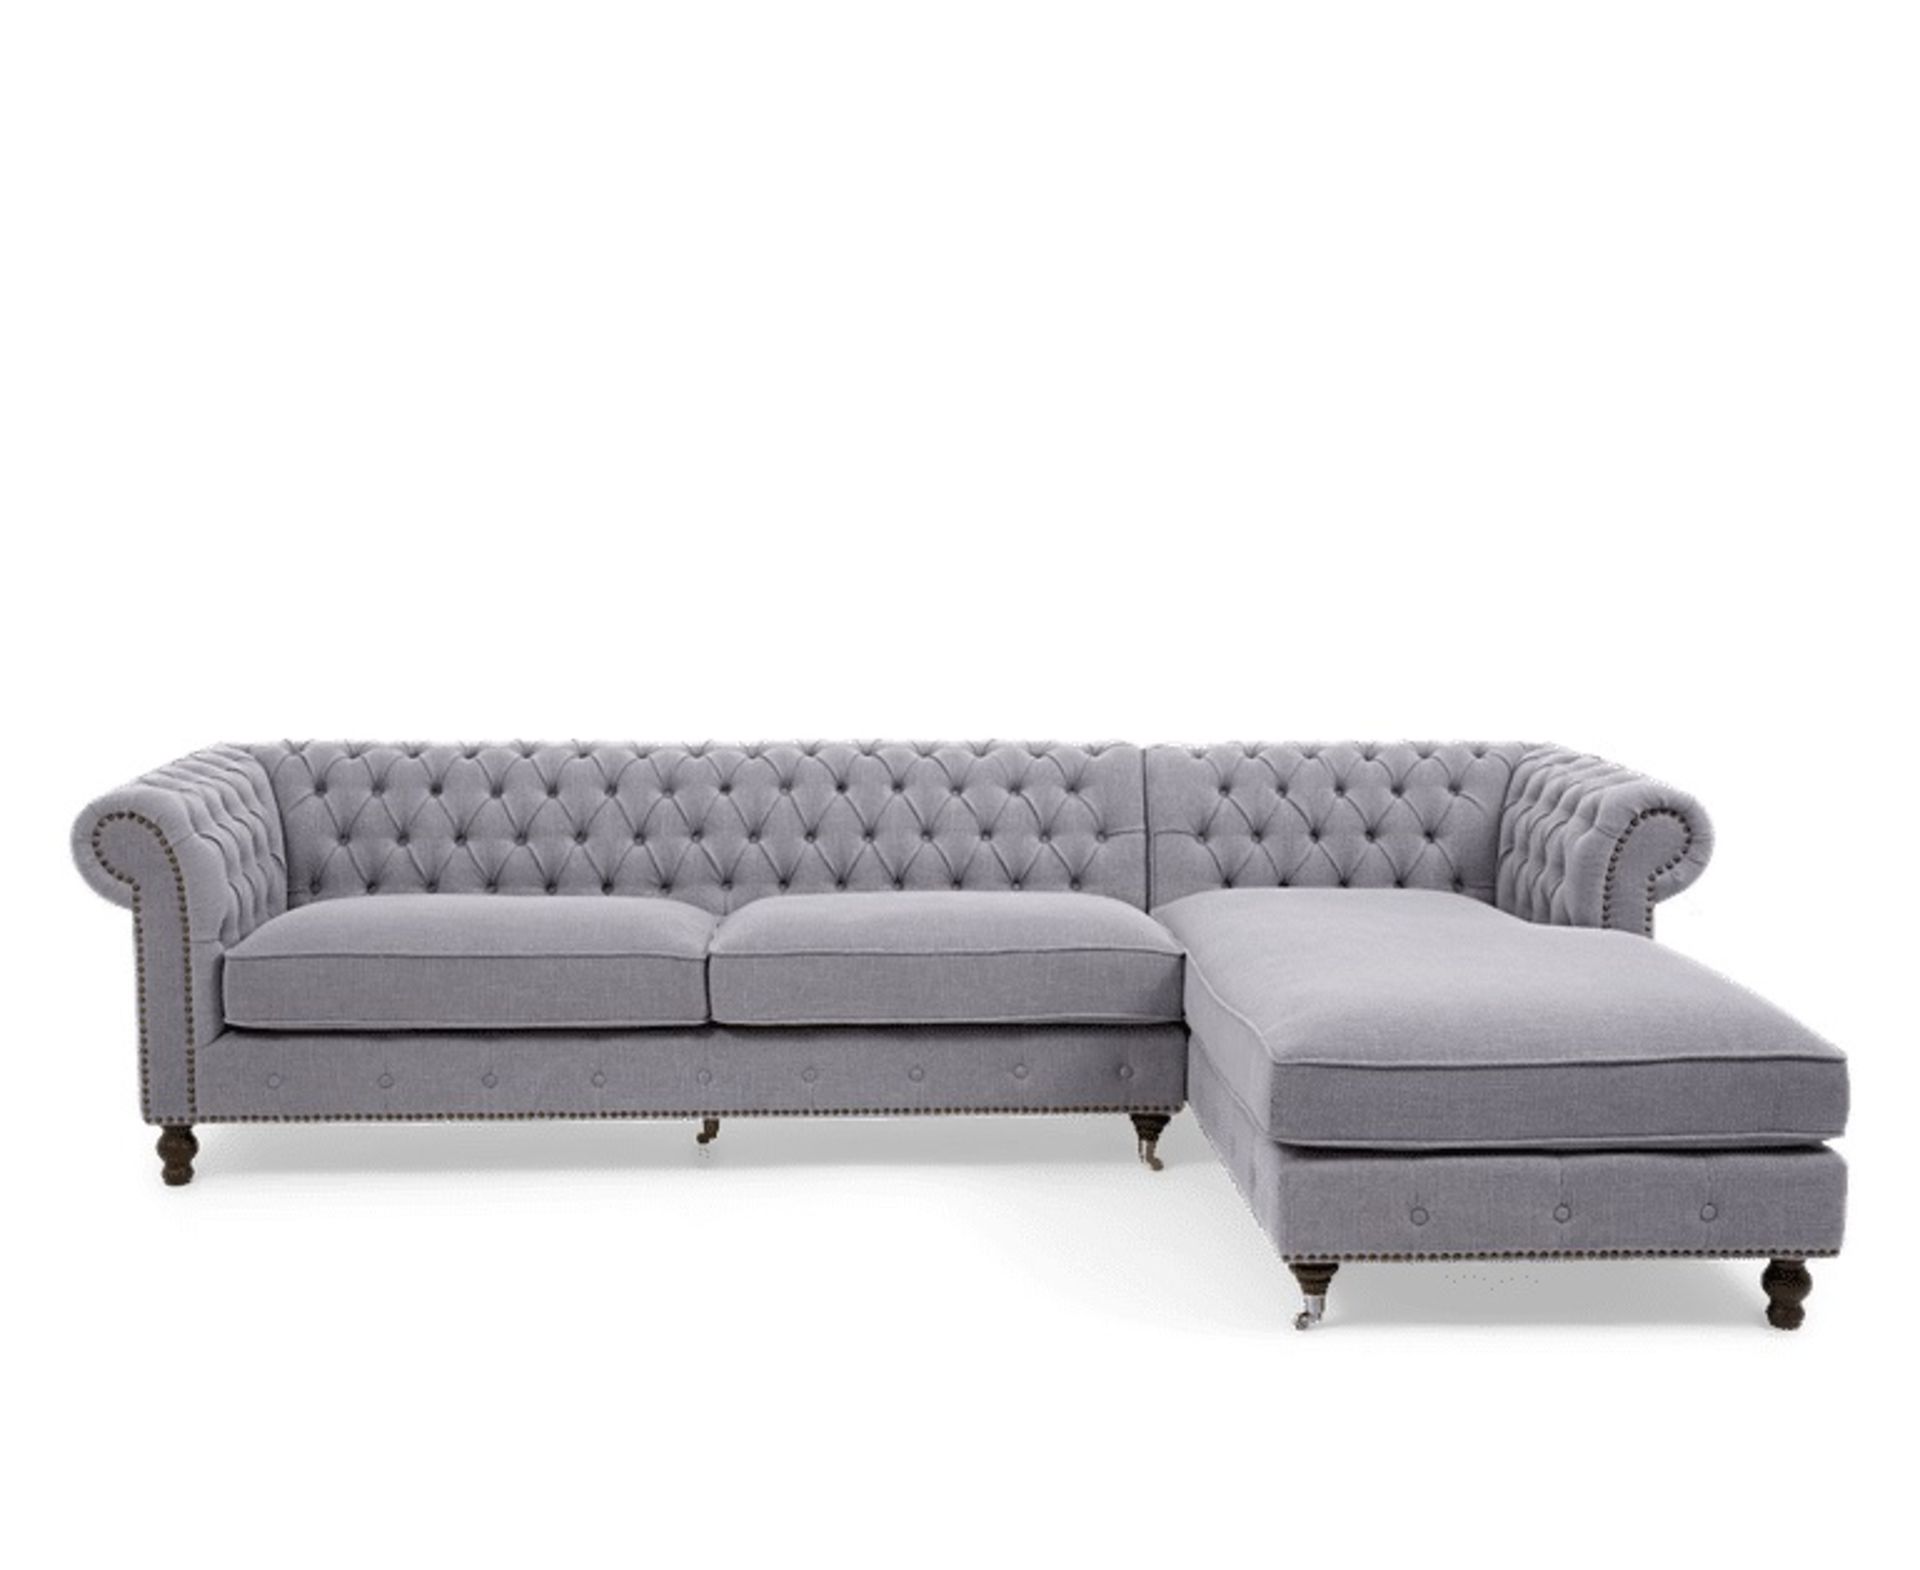 Flora Grey Linen Right Facing Chesterfield Corner Chaise Sofa Comfort, Luxury, Style And Elegance